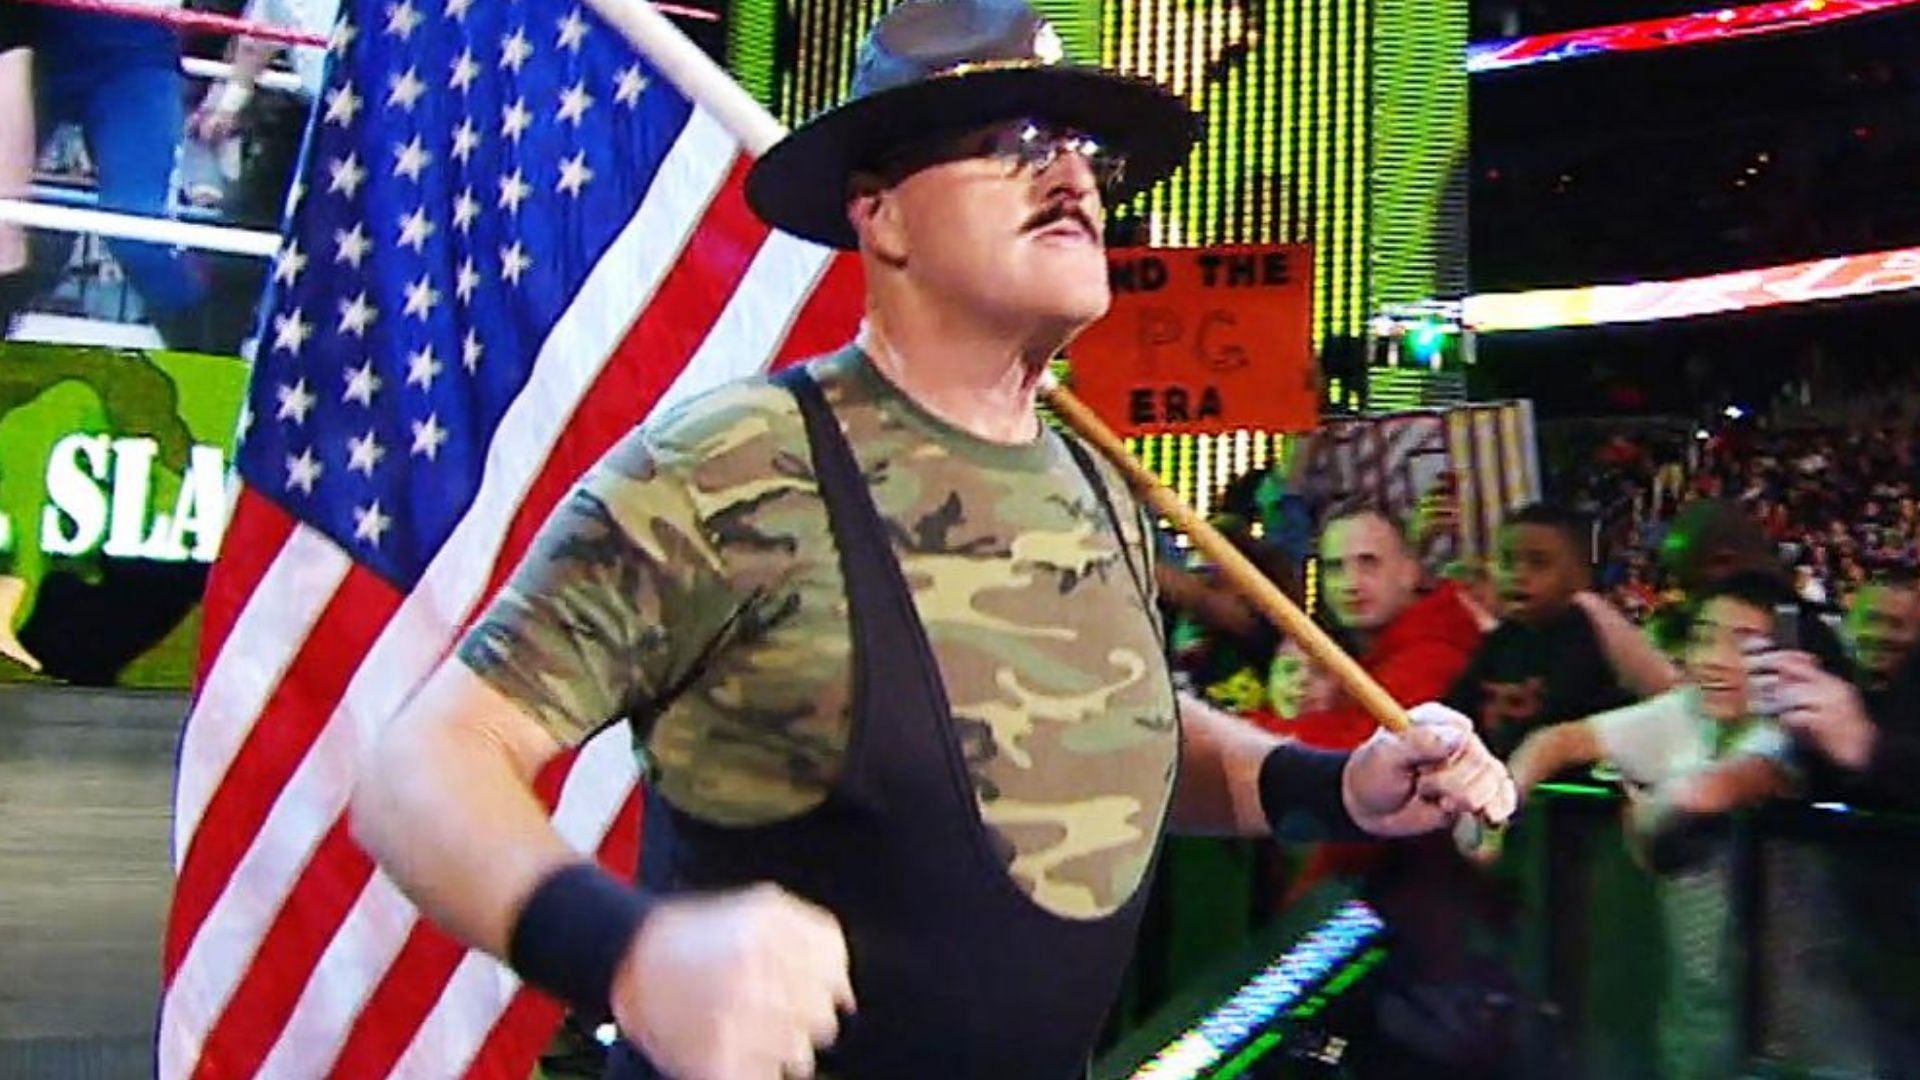 Sgt. Slaughter is one of WWE